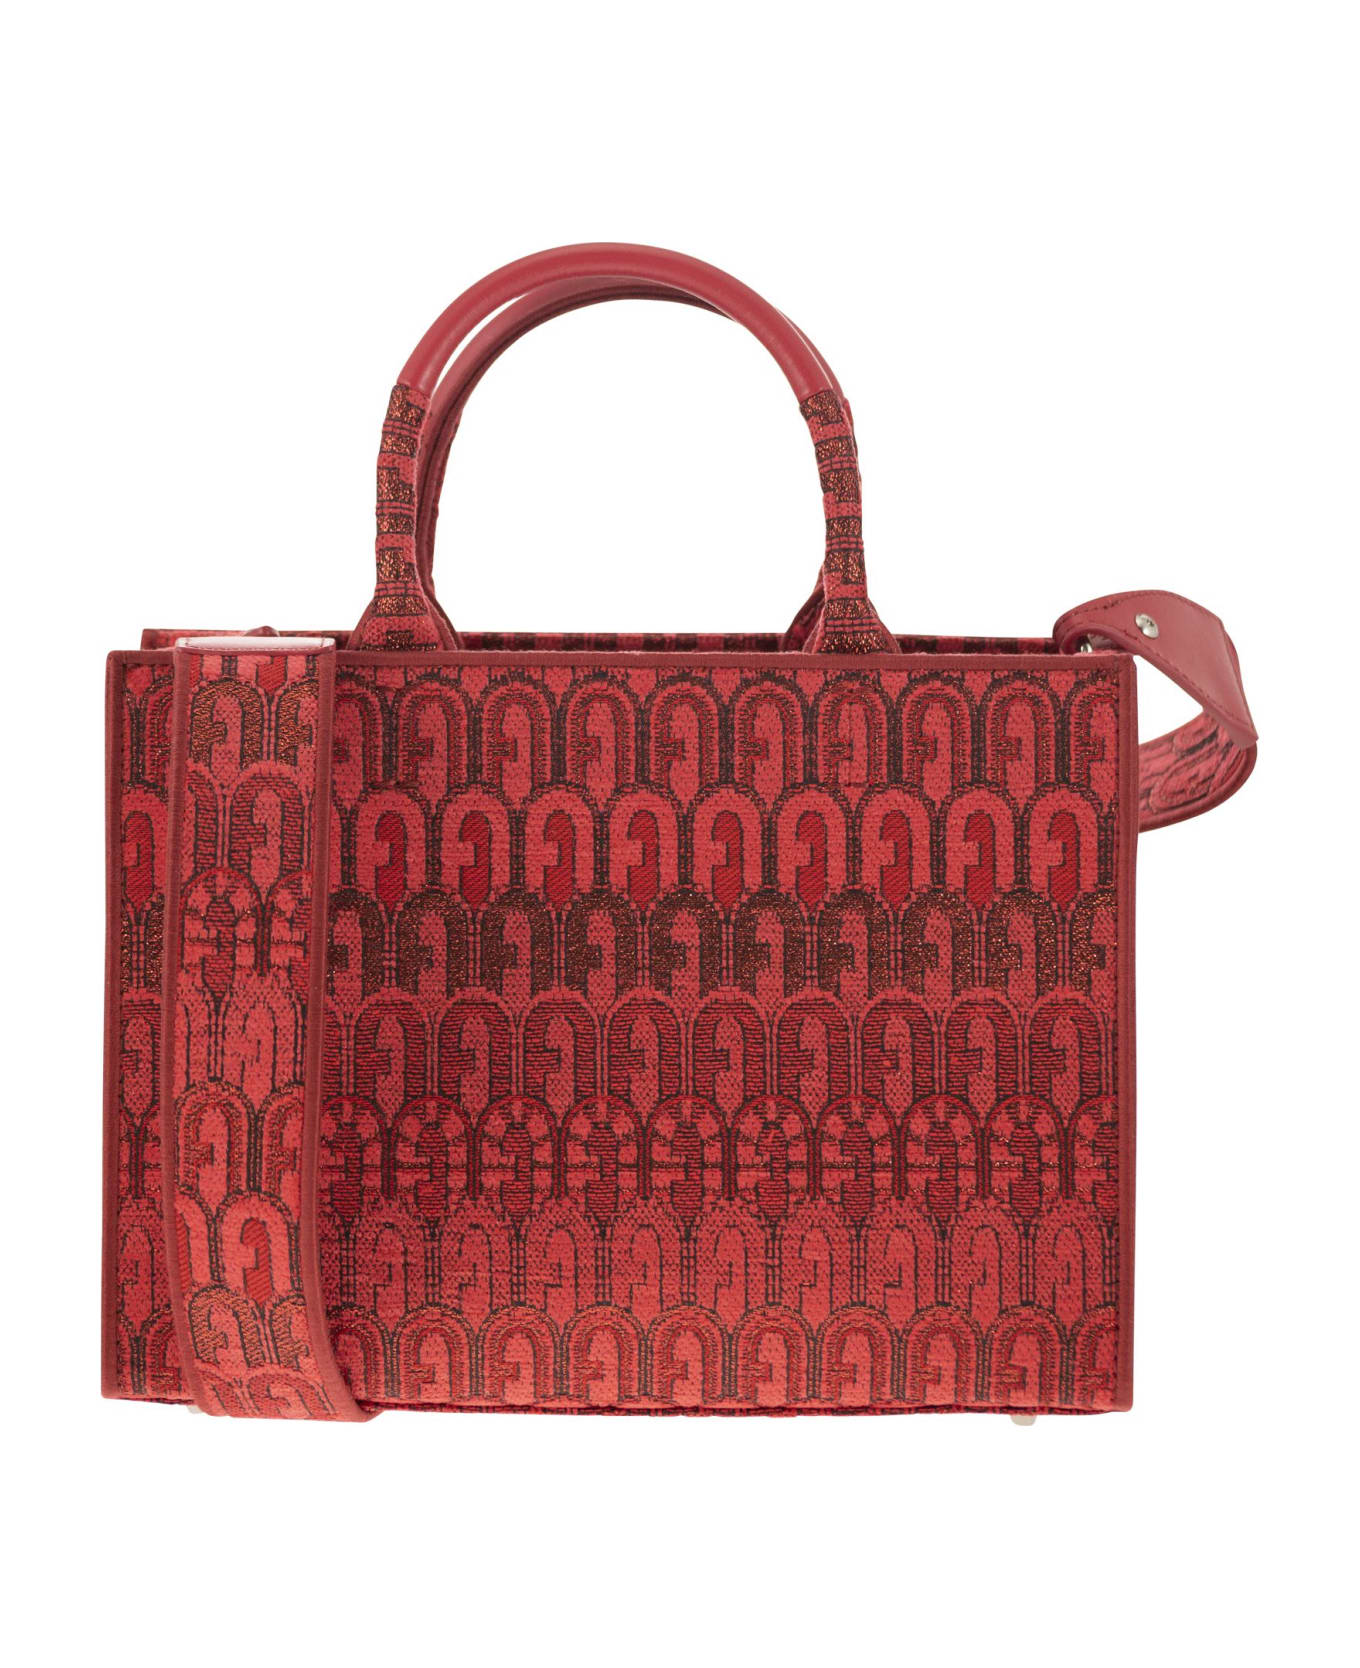 Furla Opportunity - Tote Bag Small - Red